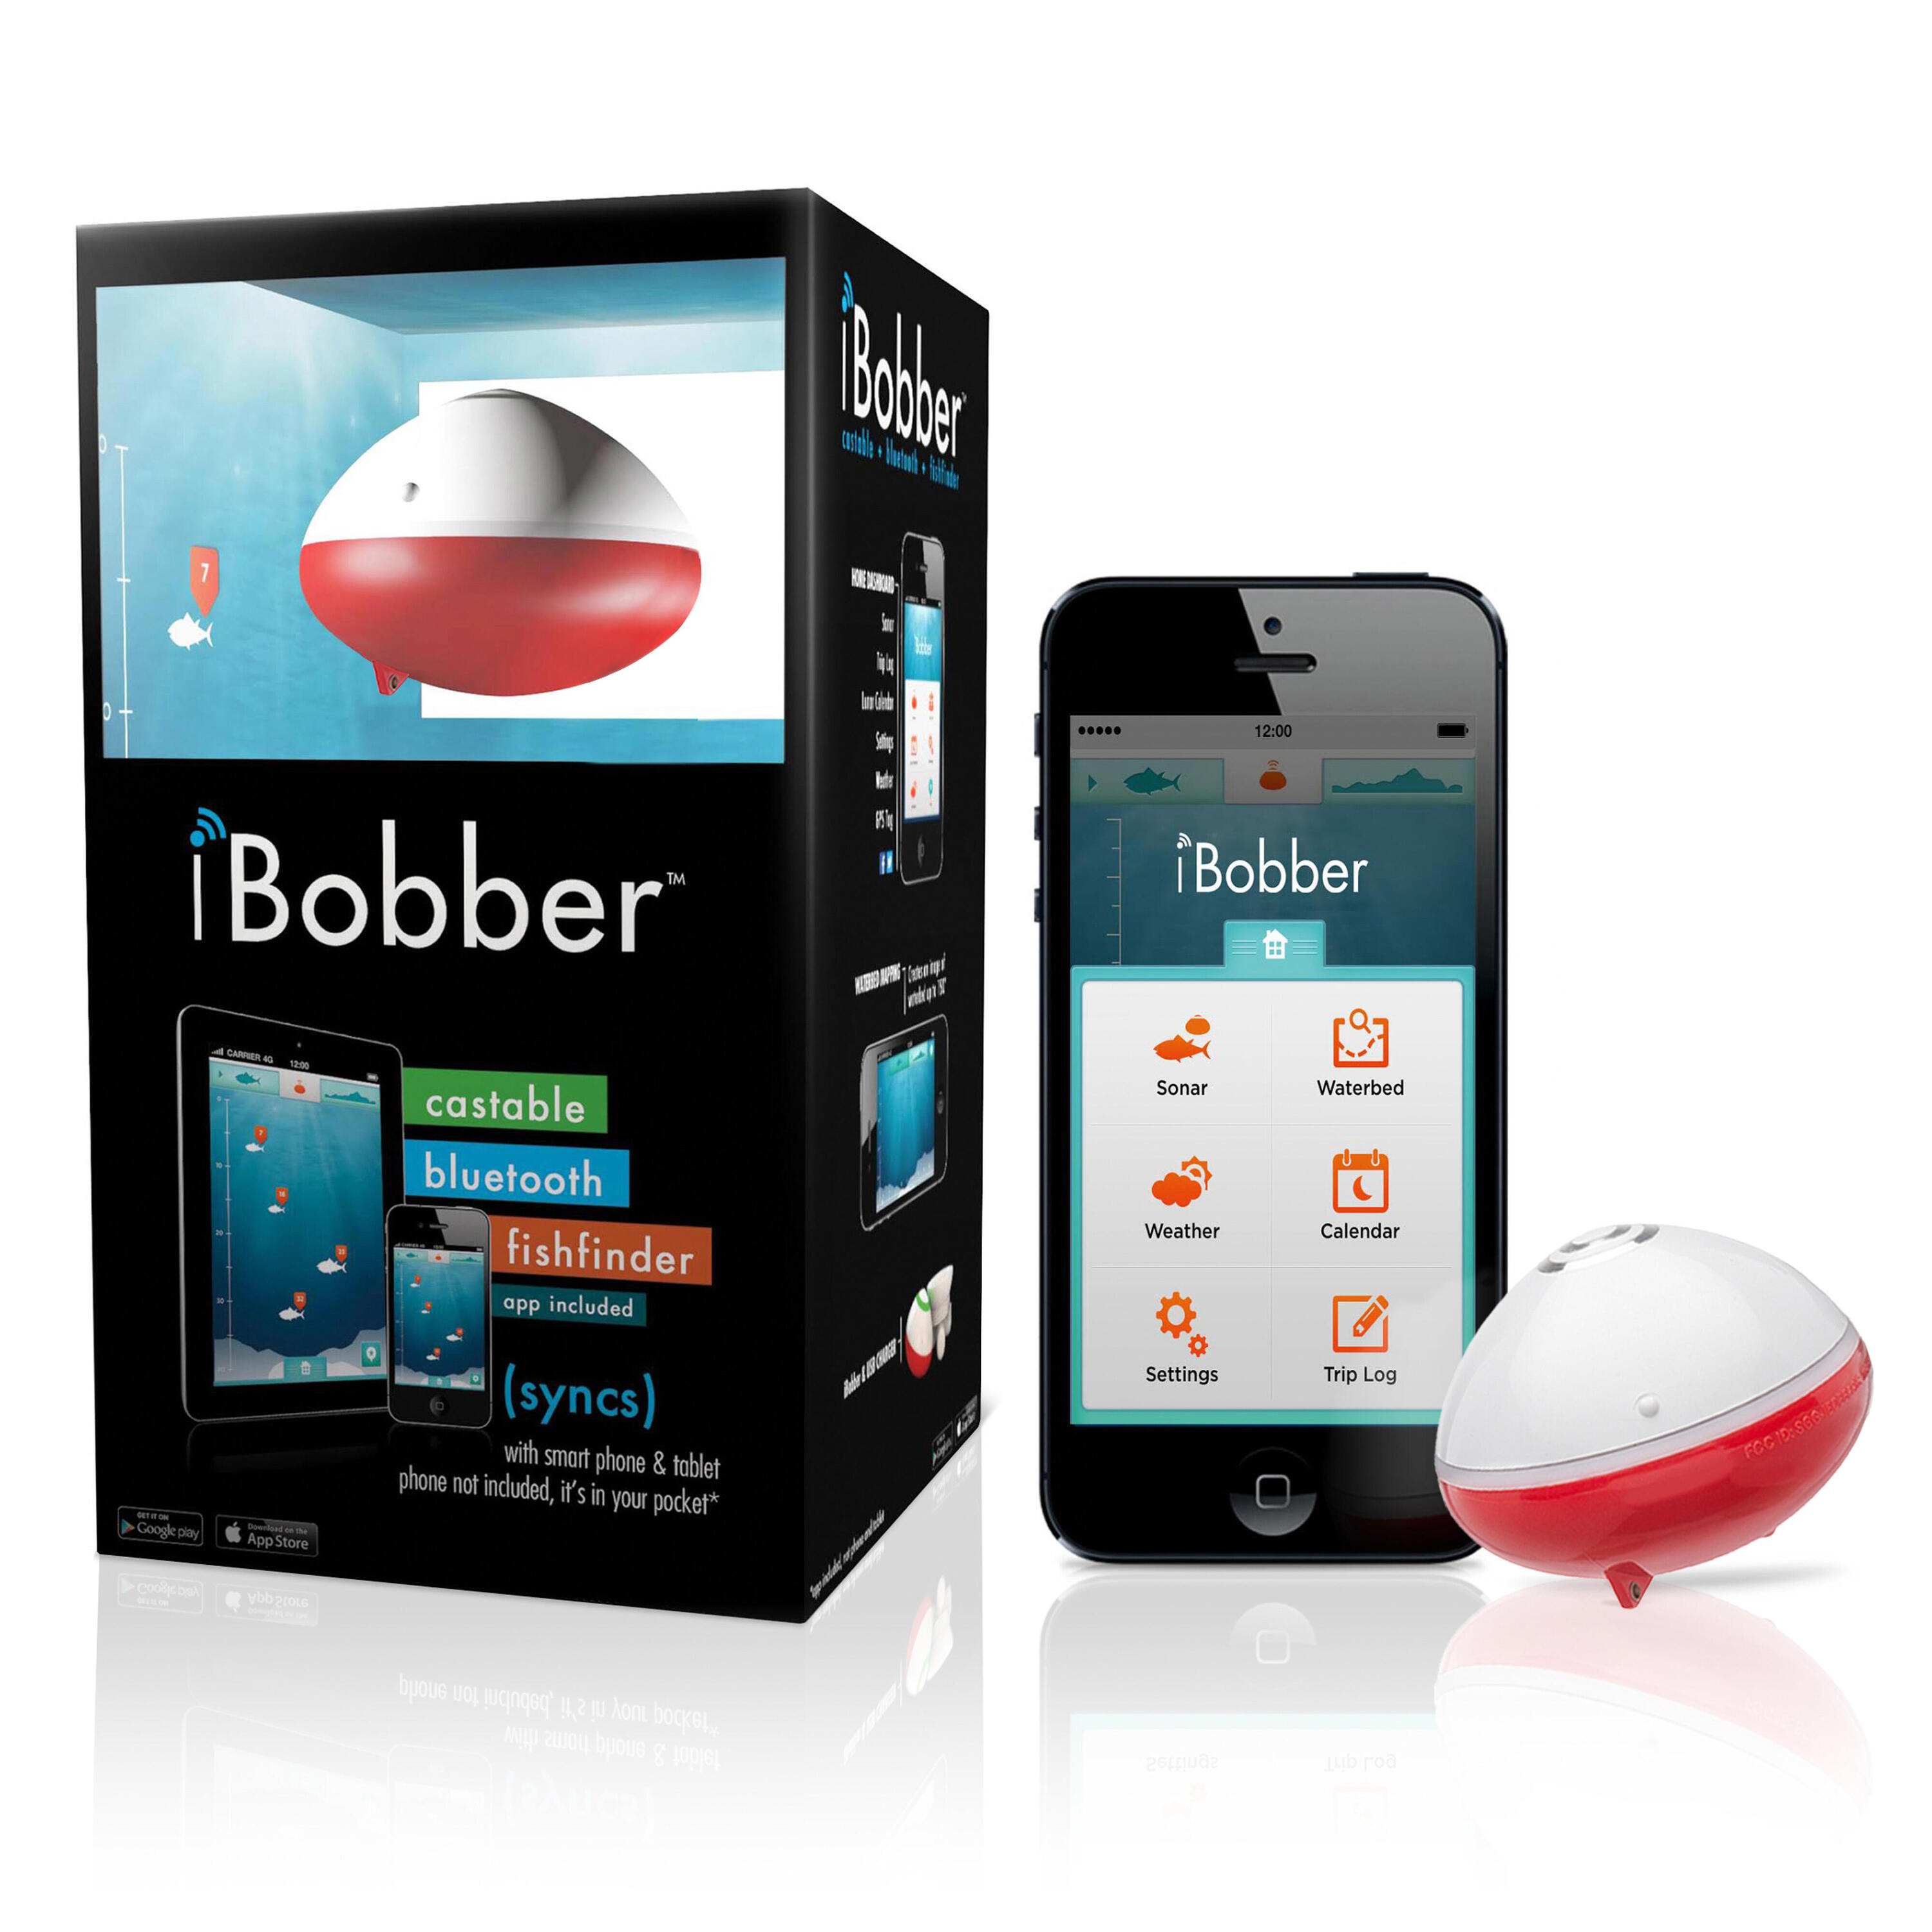 iBobber Castable Bluetooth Smart Fish Finder - Carp and Night Fishing 1/7